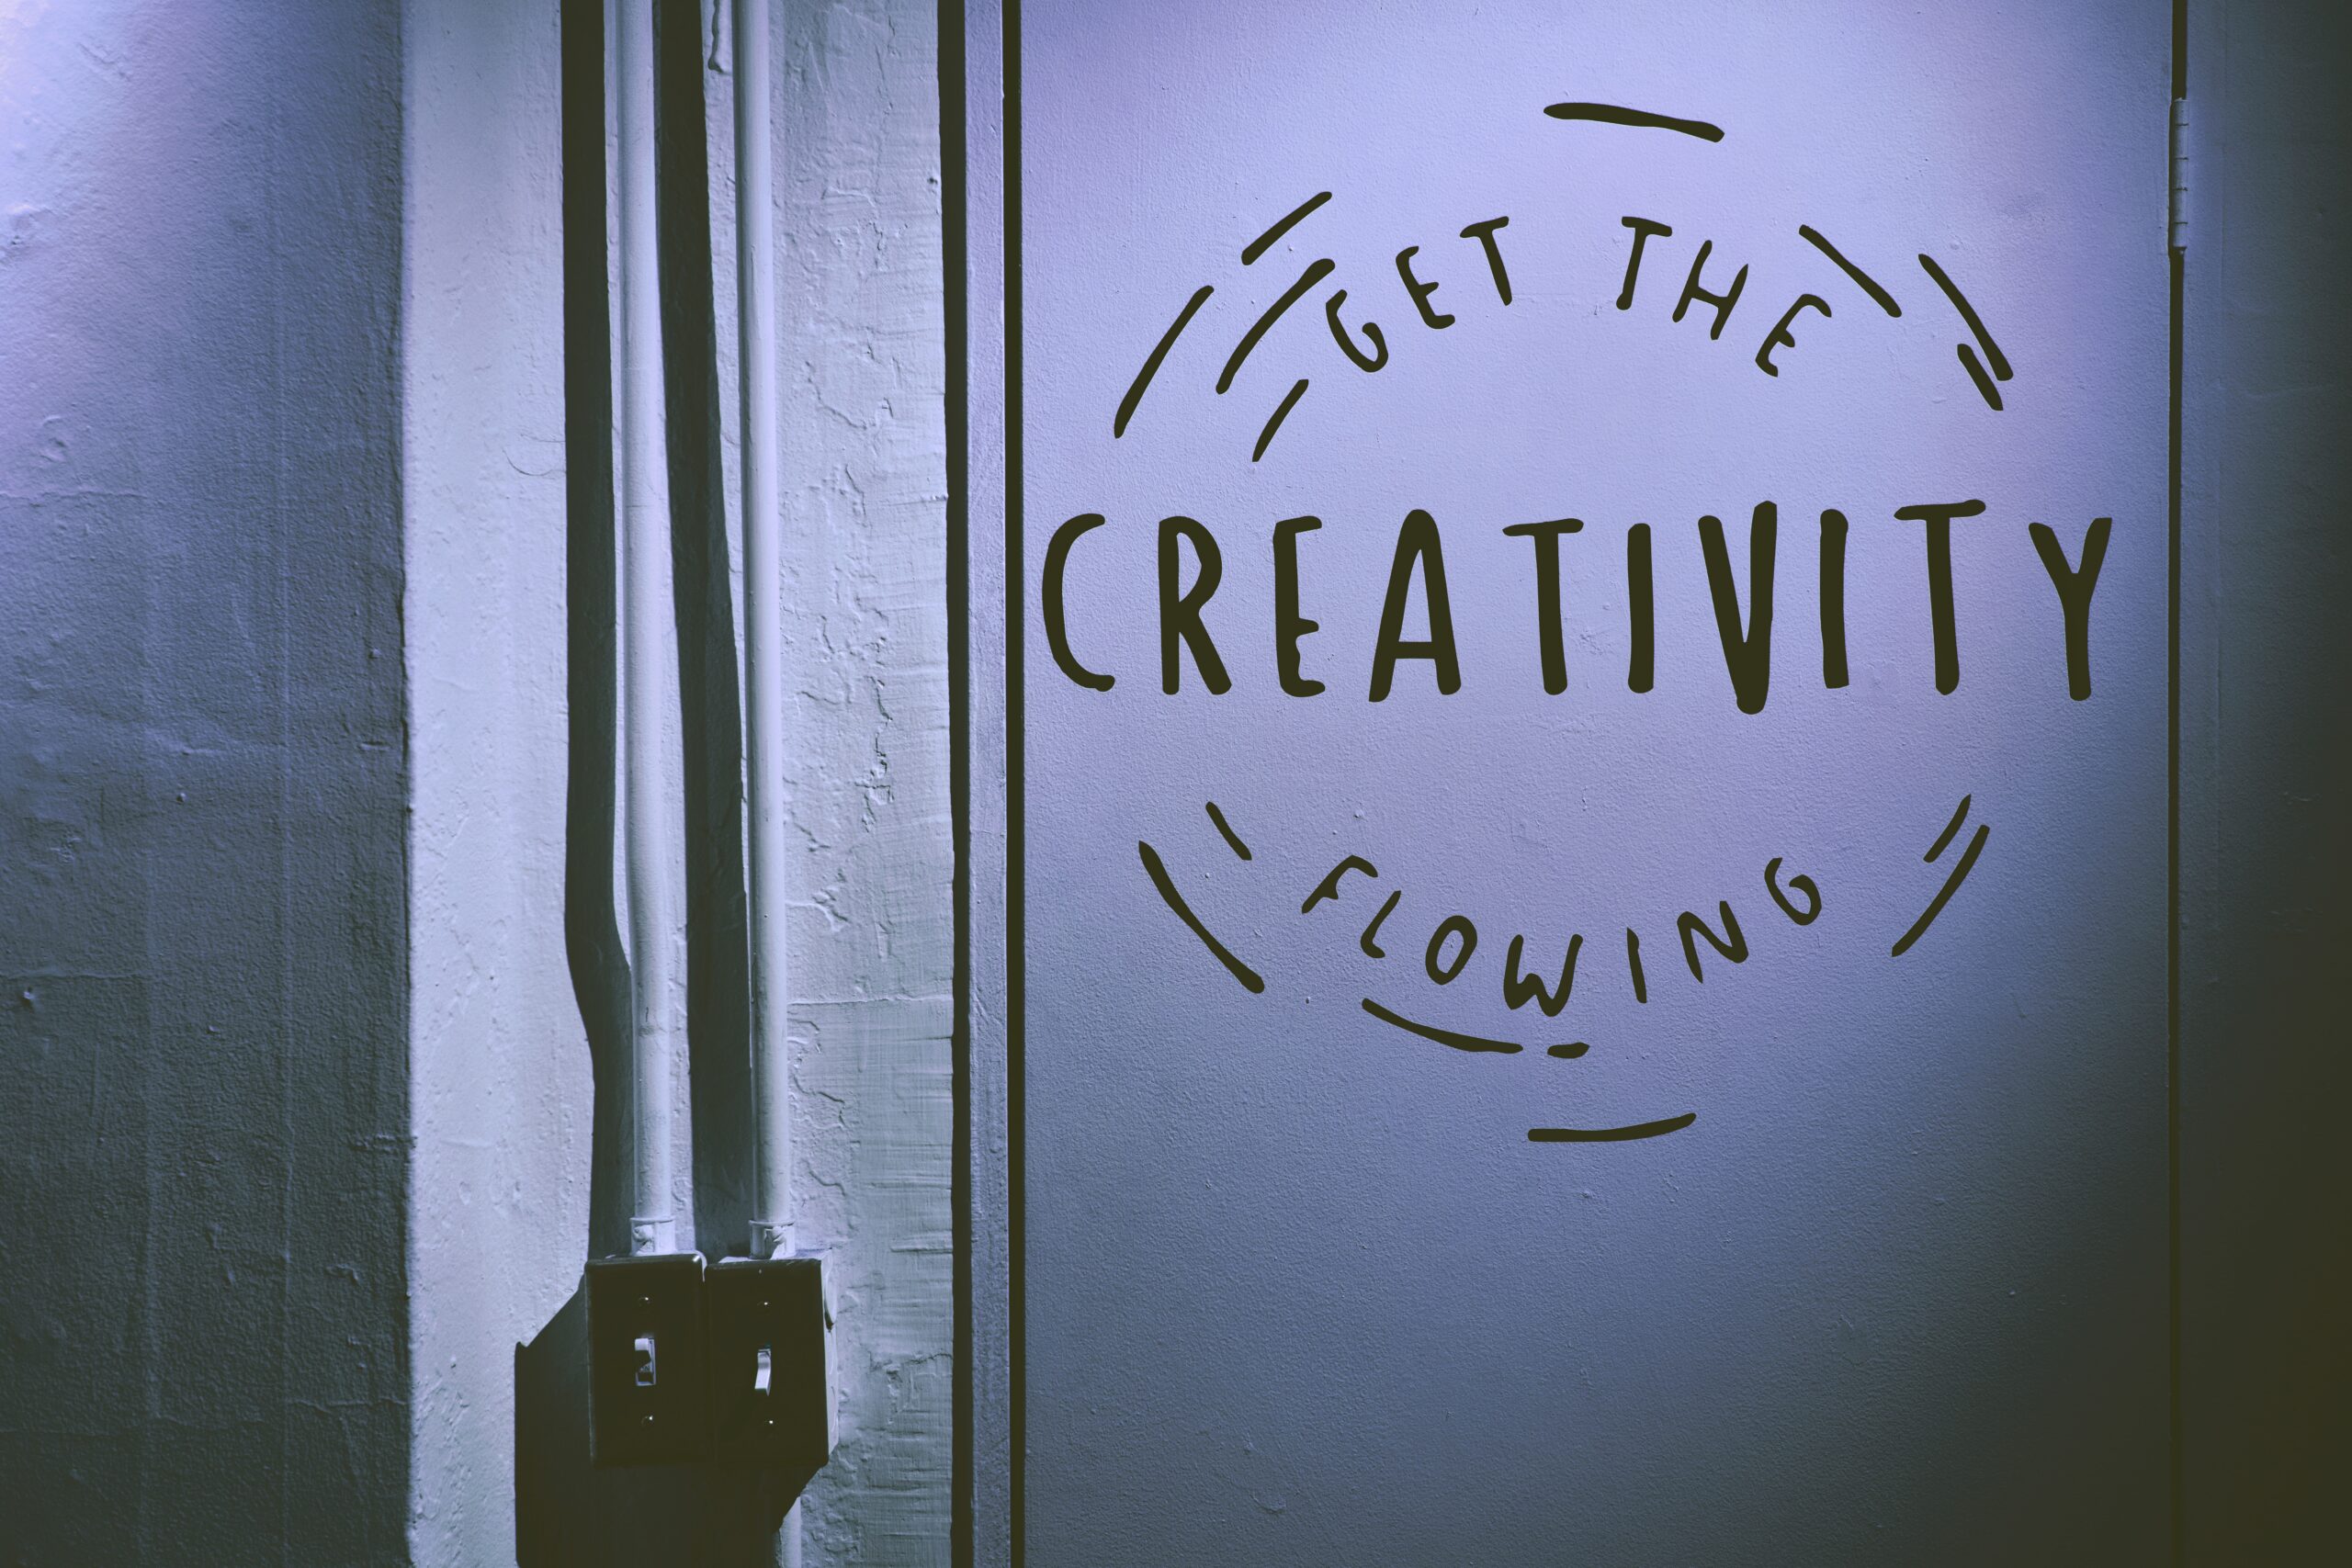 sign that says "get the creativity flowing"